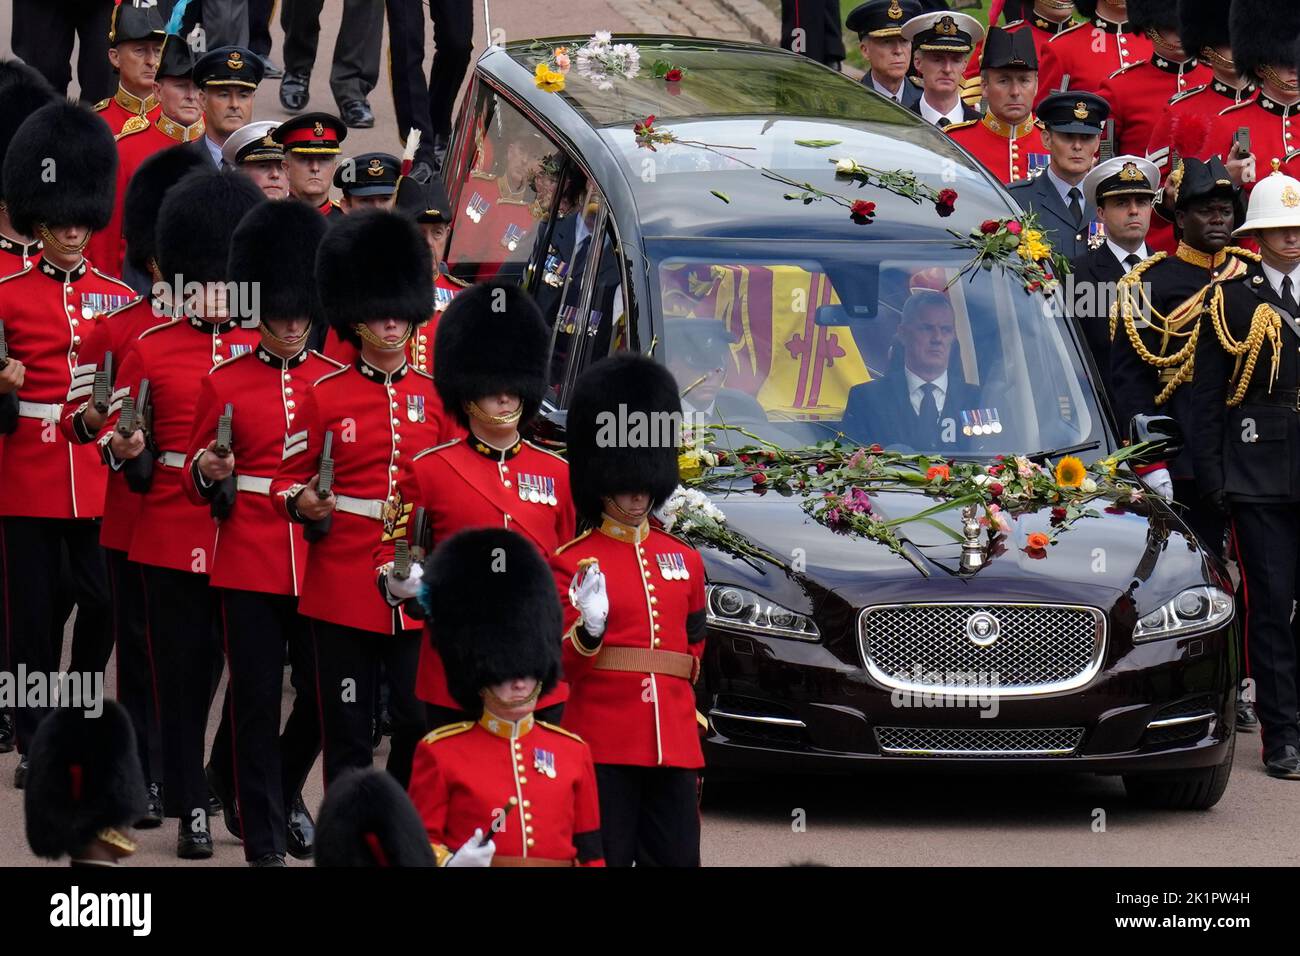 Grenadier Guards escort the State Hearse carrying the coffin of Queen Elizabeth II, draped in the Royal Standard with the Imperial State Crown and the Sovereign's Orb and Sceptre, during the Ceremonial Procession through Windsor Castle to a Committal Service at St George's Chapel. Picture date: Monday September 19, 2022. Stock Photo